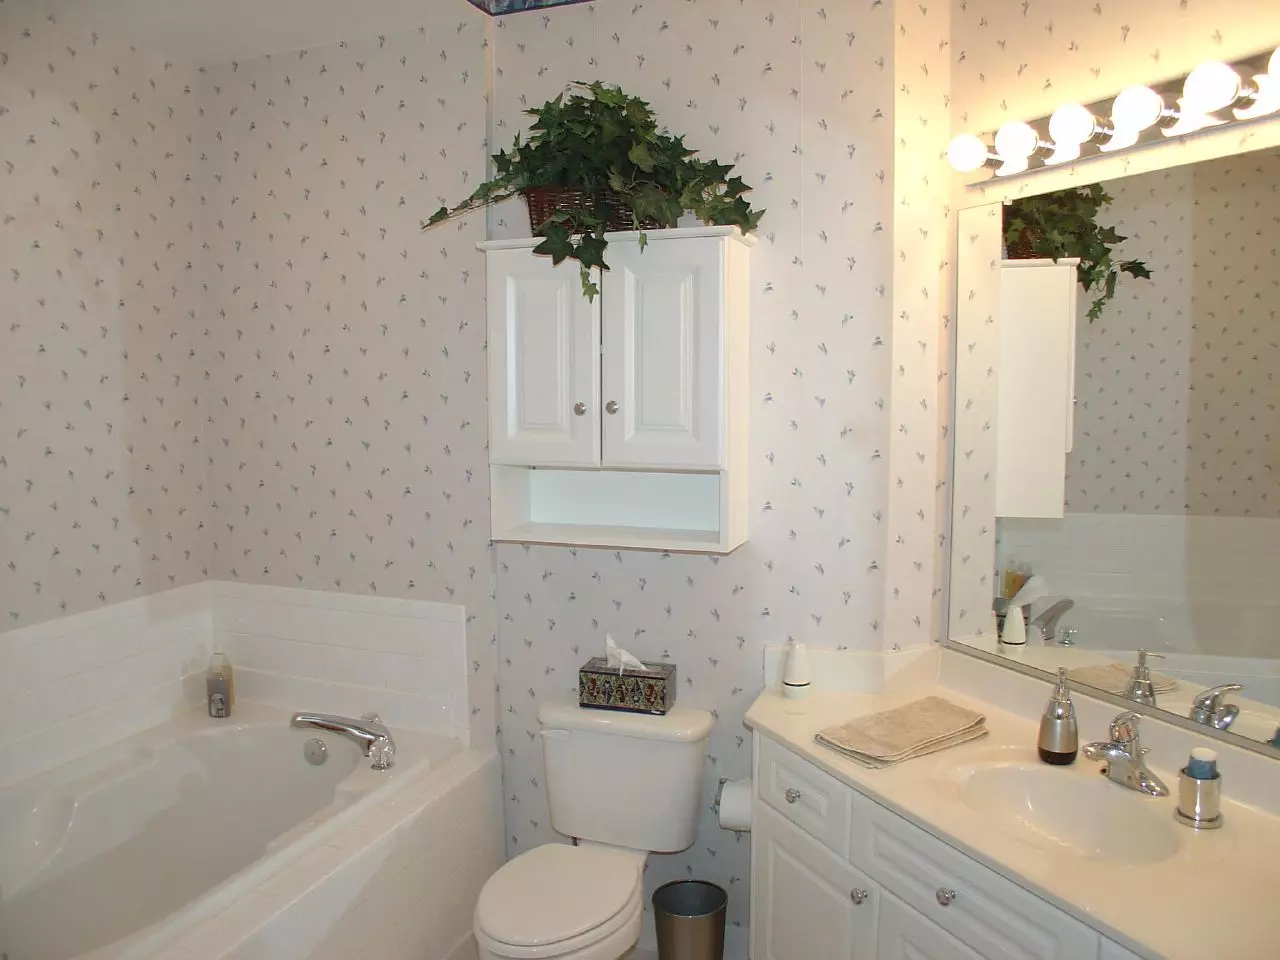 How to separate the walls in the bathroom other than tiles? 65 photos: design options. Wallpapers and other finishing materials. What can be sewn and wall instead of tile? 10108_34